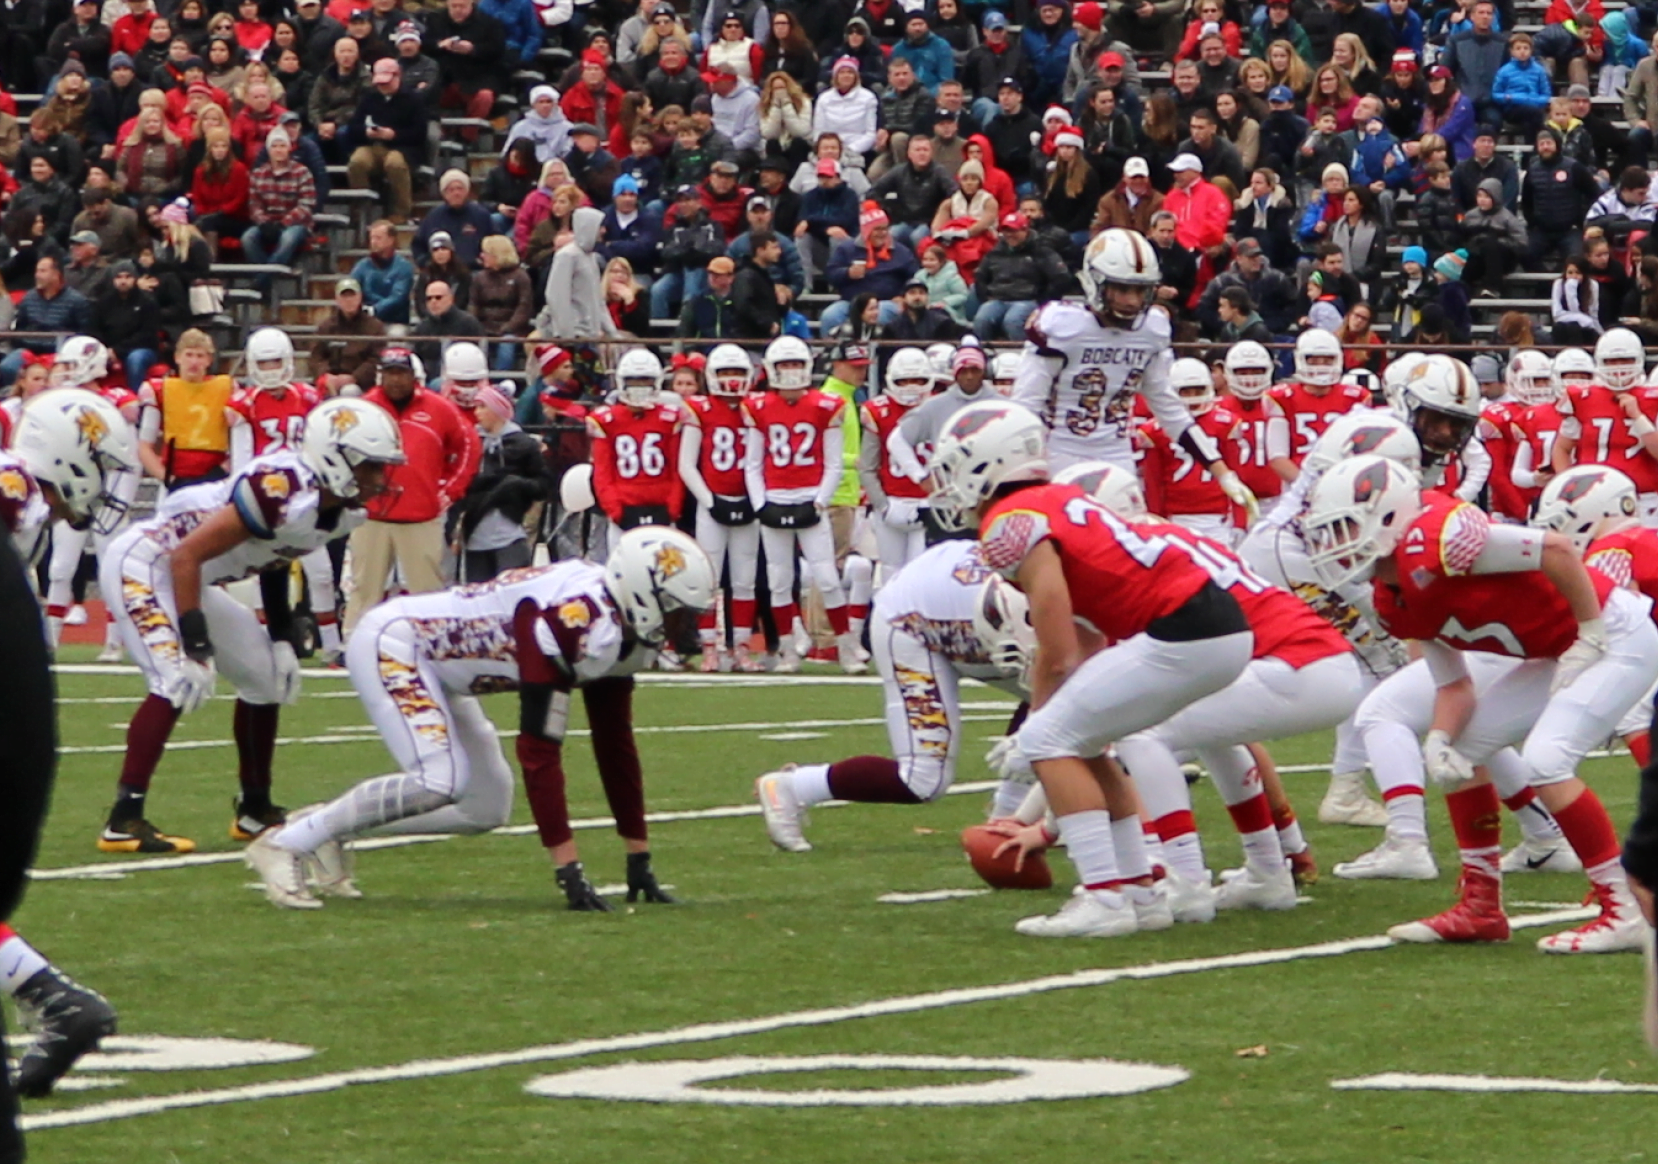 On Sunday, Dec 3, GHS Cardinals beat the South Windsor Bobcats 36 to 7. Photo: Leslie Yager